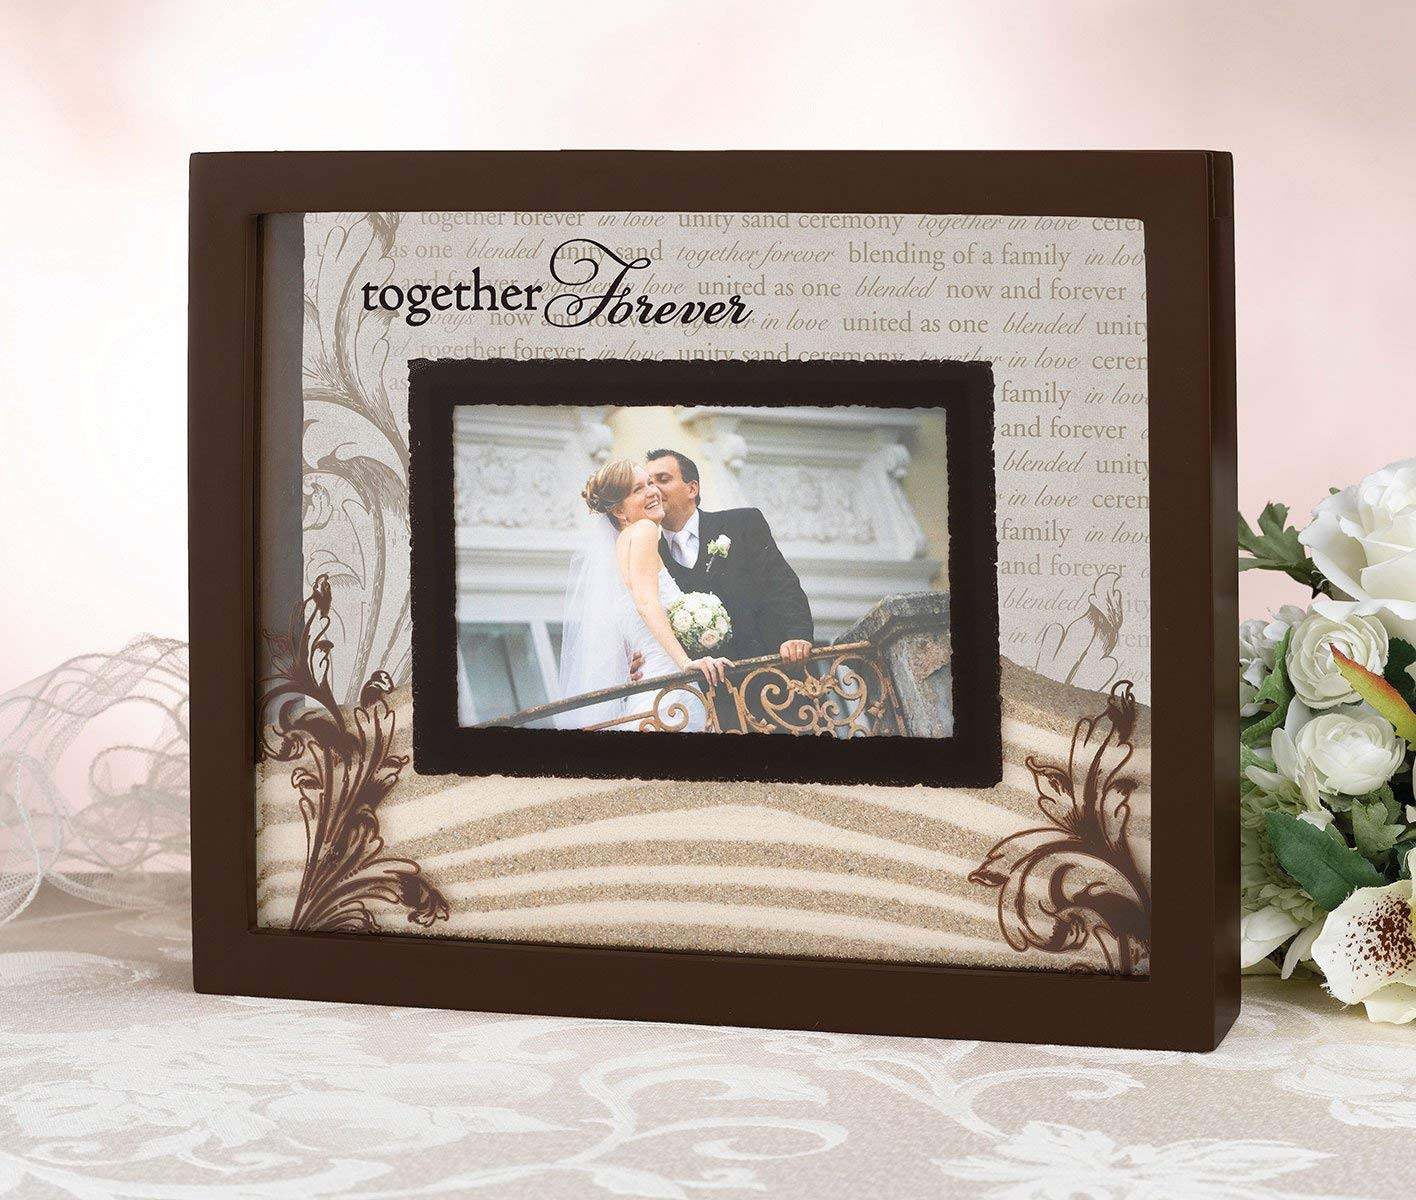 18 Perfect Unity Sand Ceremony Vase 2024 free download unity sand ceremony vase of amazon com lillian rose unity sand ceremony wedding picture frame intended for amazon com lillian rose unity sand ceremony wedding picture frame single frames